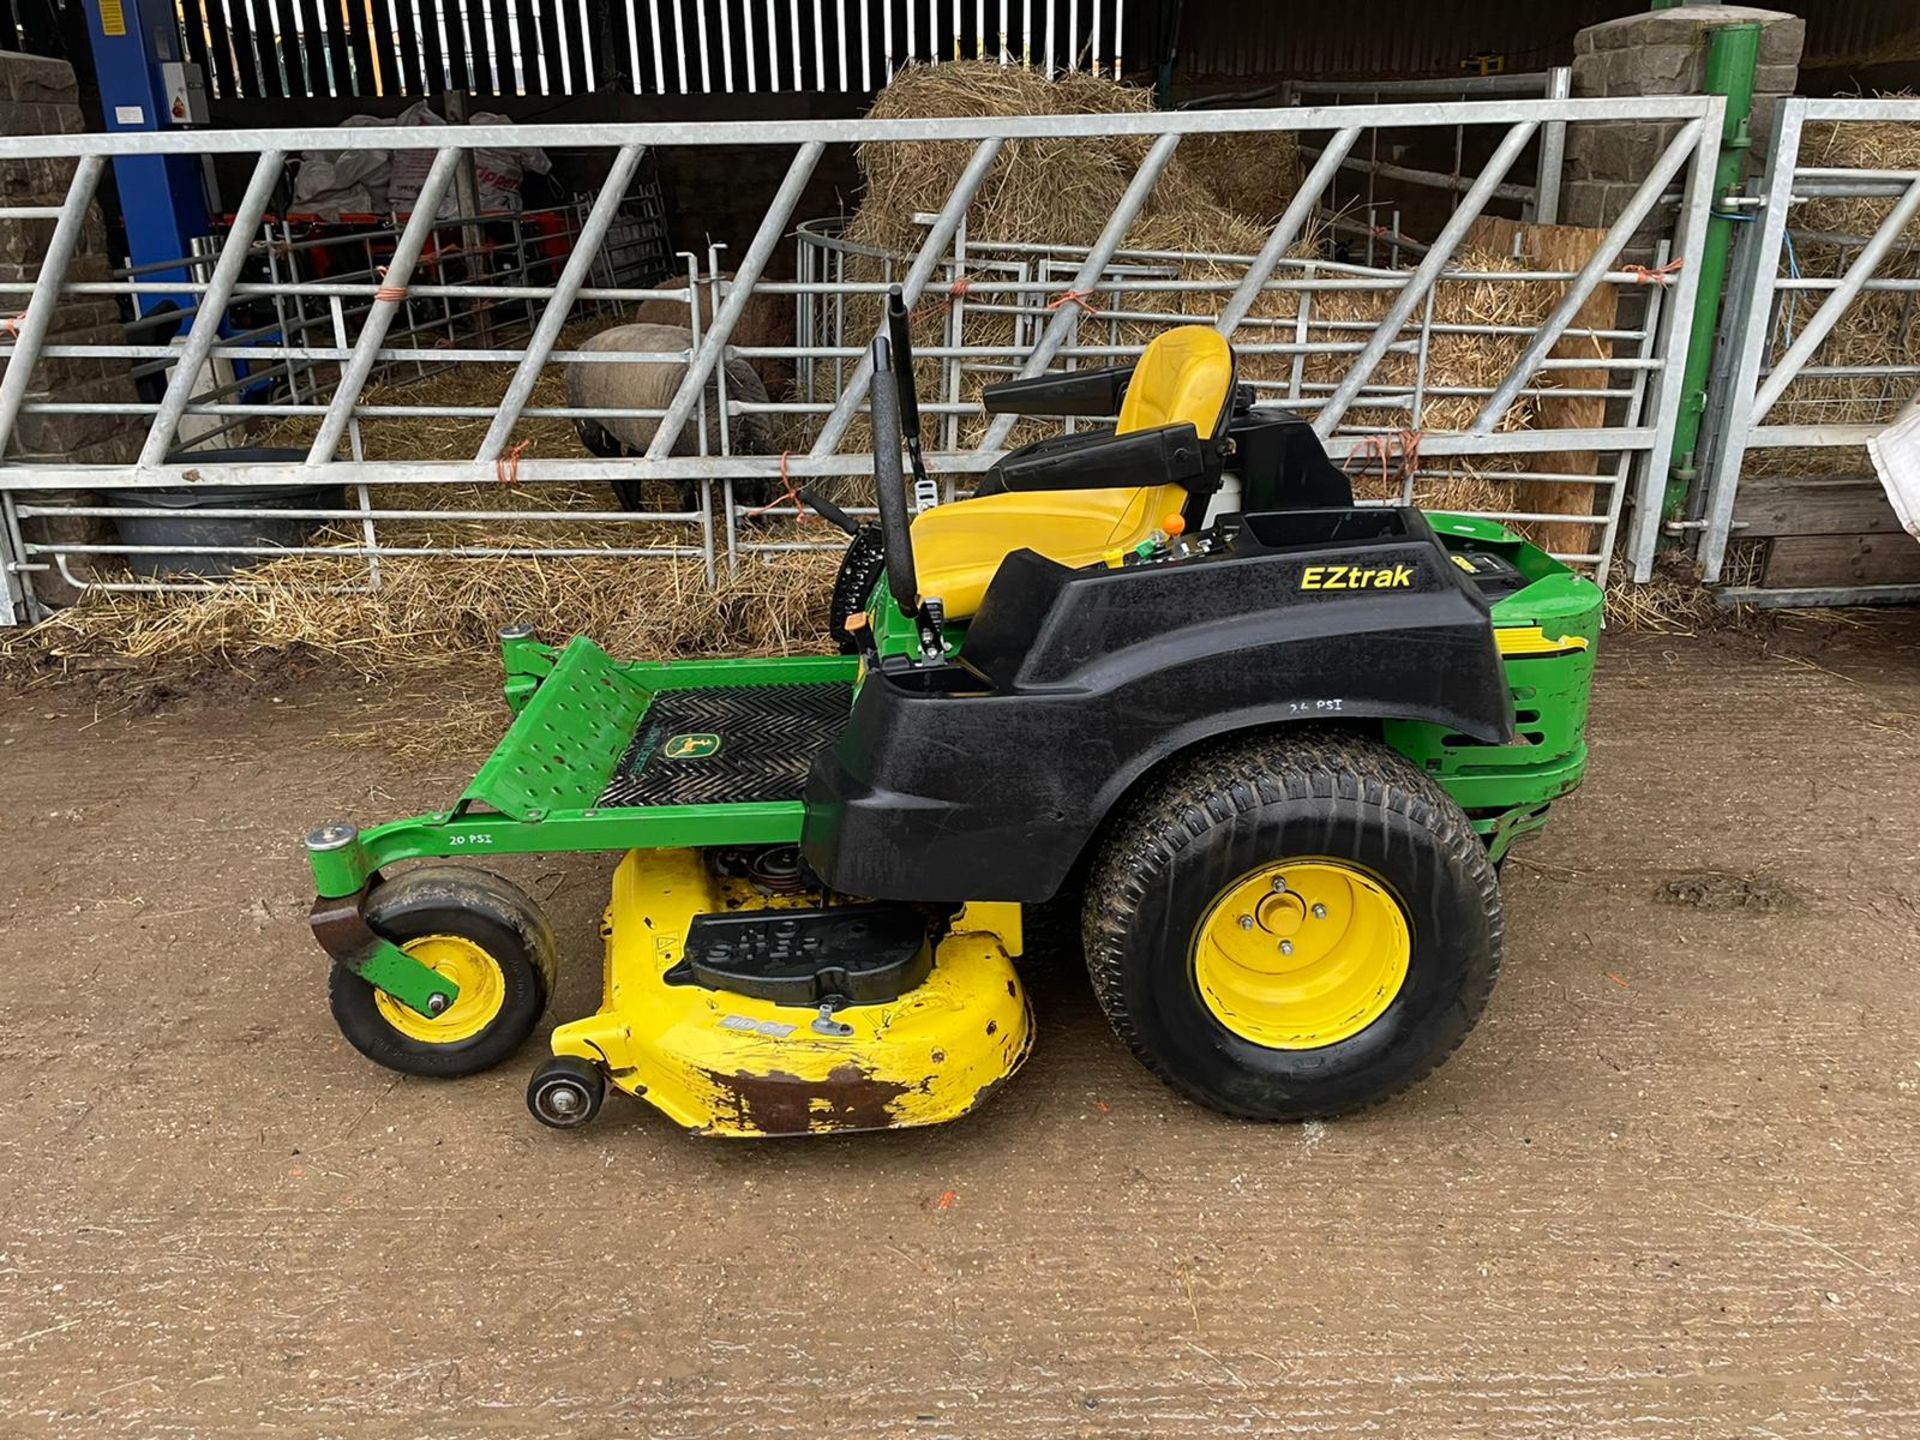 2014 JOHN DEERE Z435 ZERO TURN MOWER, SOLD NEW IN 2015, RUNS, DRIVES AND CUTS, GOOD CONDITION